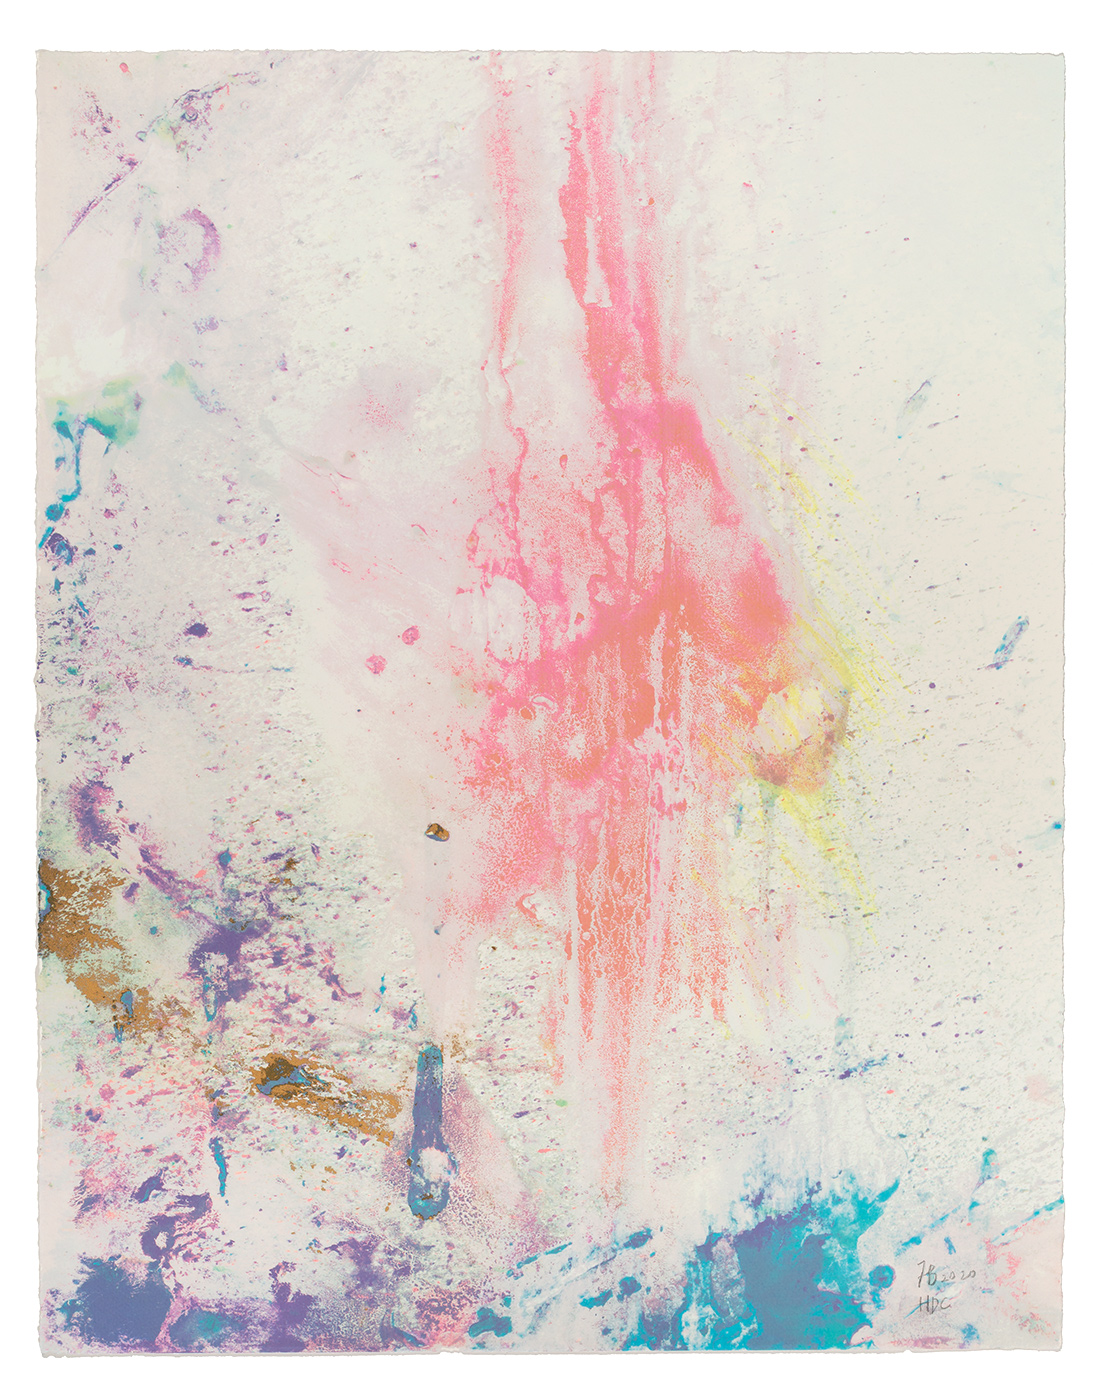 Frank Bowling, As If Eleven (2020), Screenprint, Edition of 100